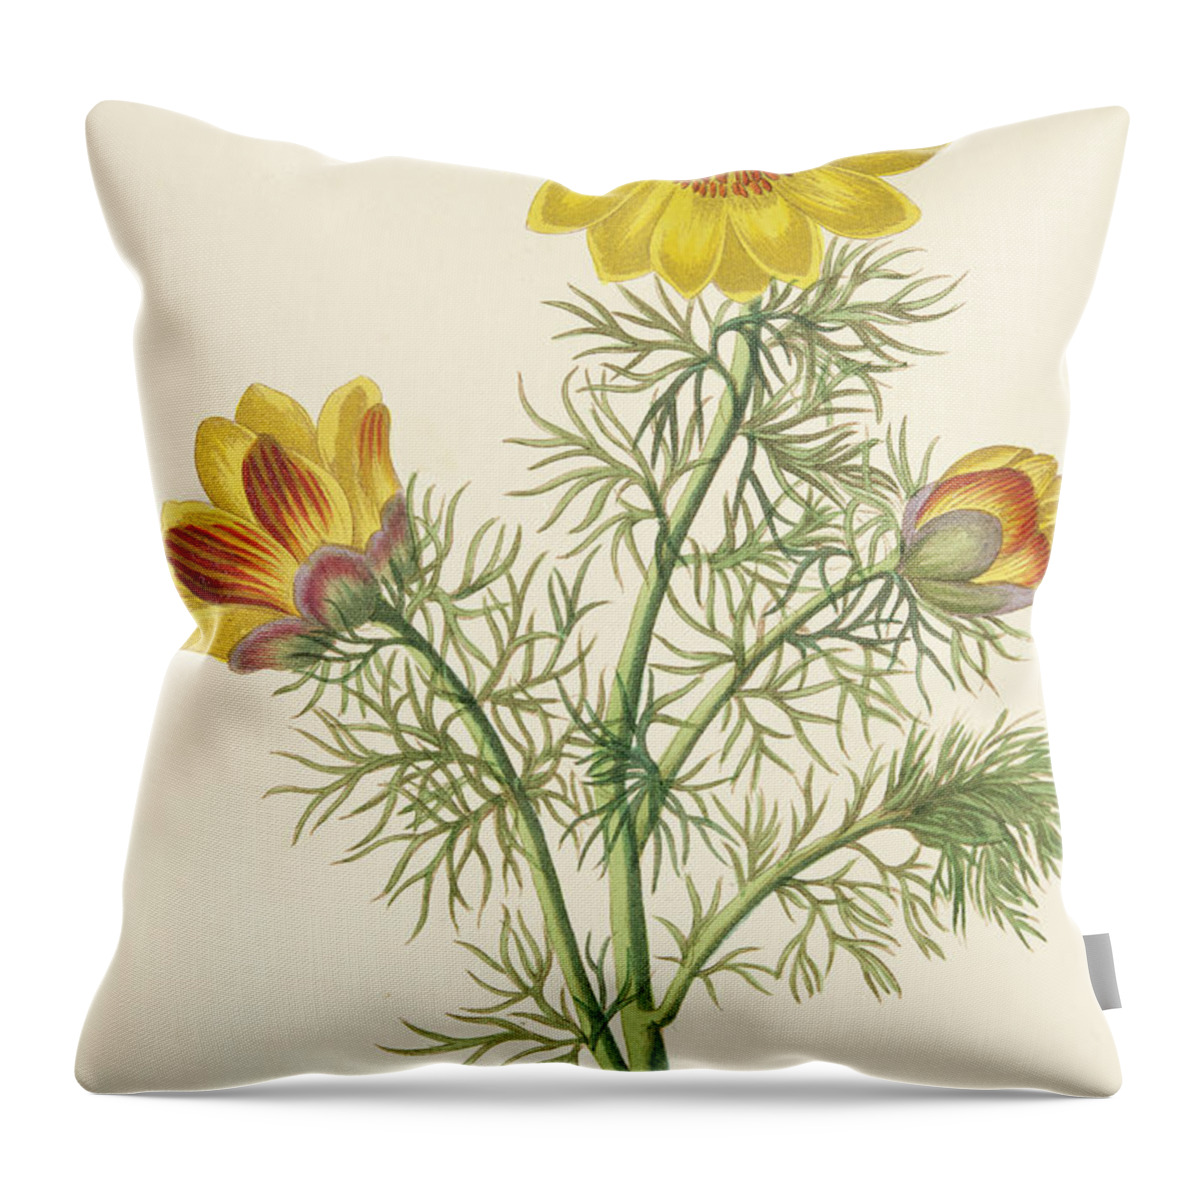 Perennial Adonis Throw Pillow featuring the painting Perennial Adonis by Pierre Puvis de Chavannes